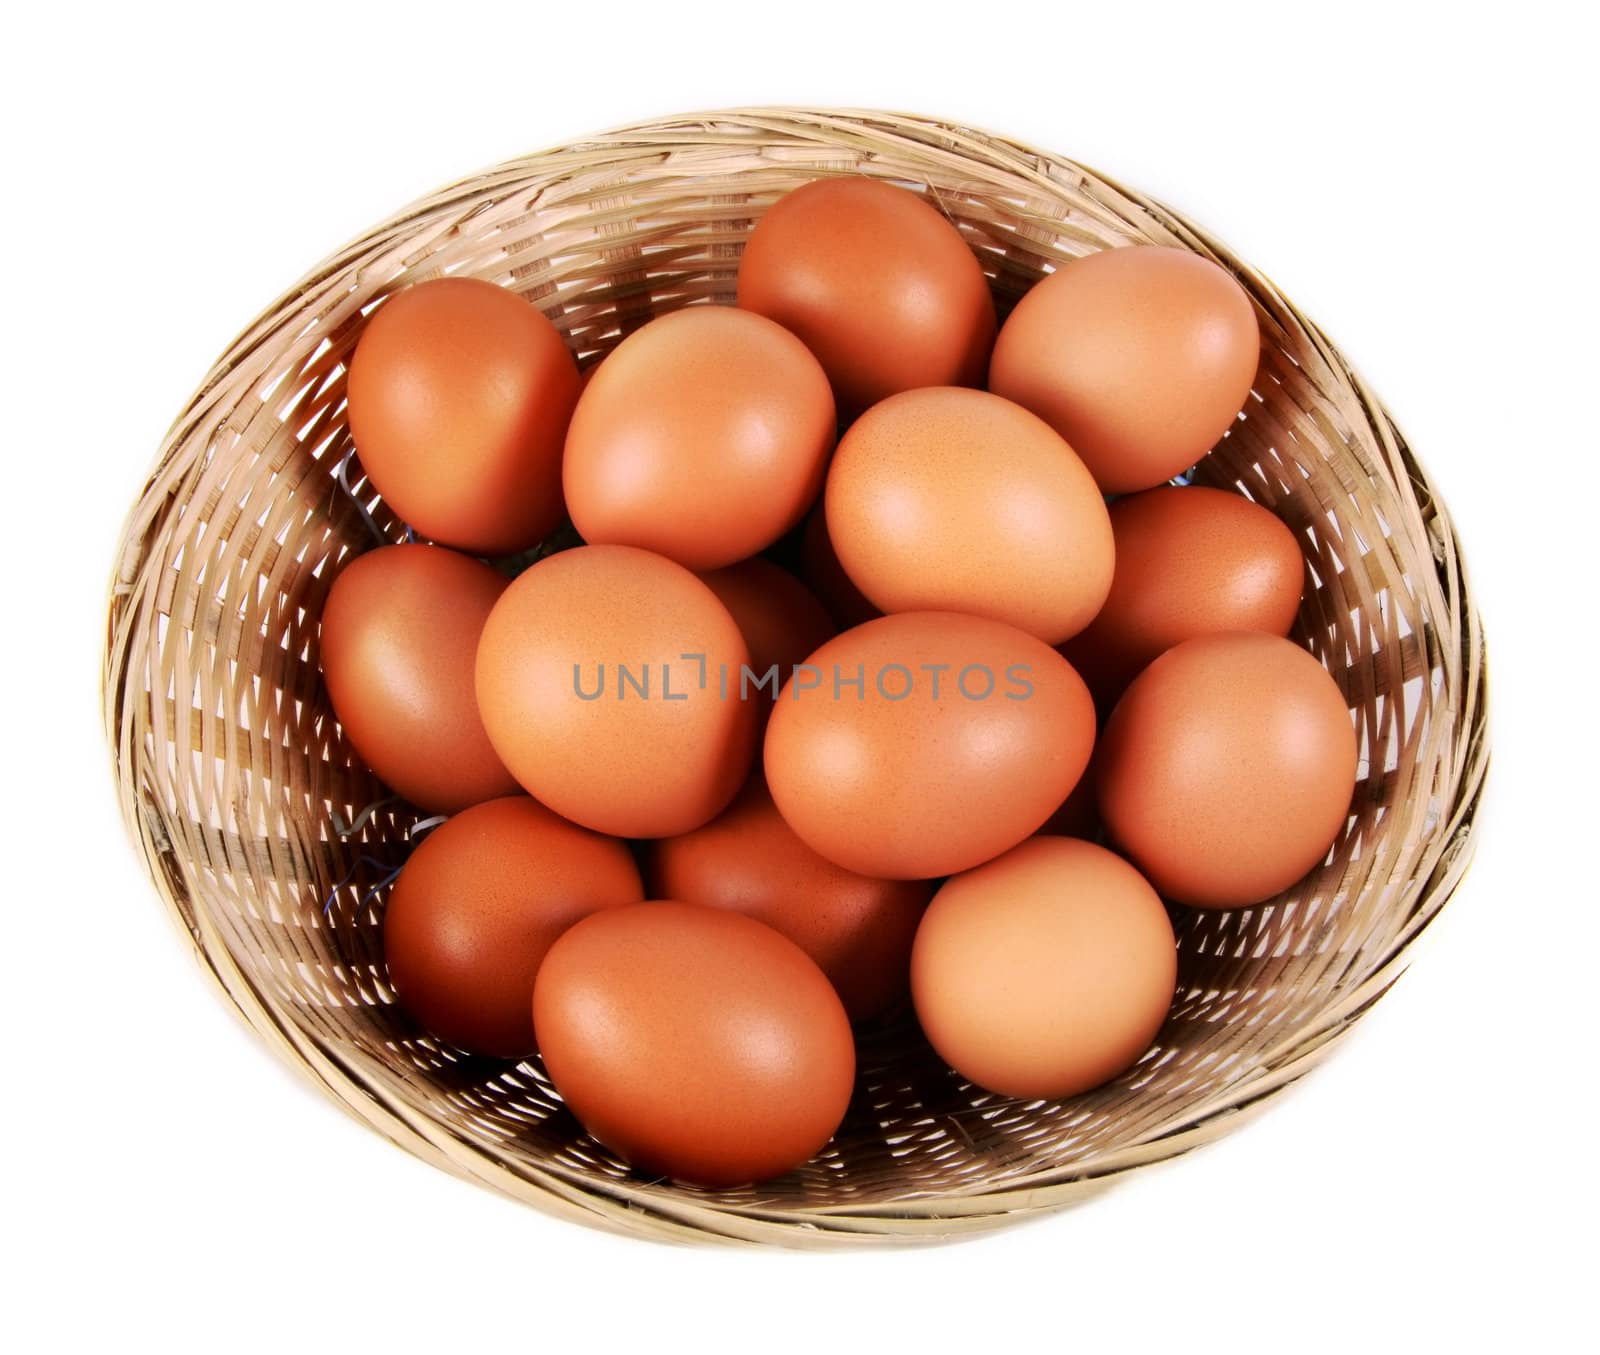 Eggs in a basket by friday